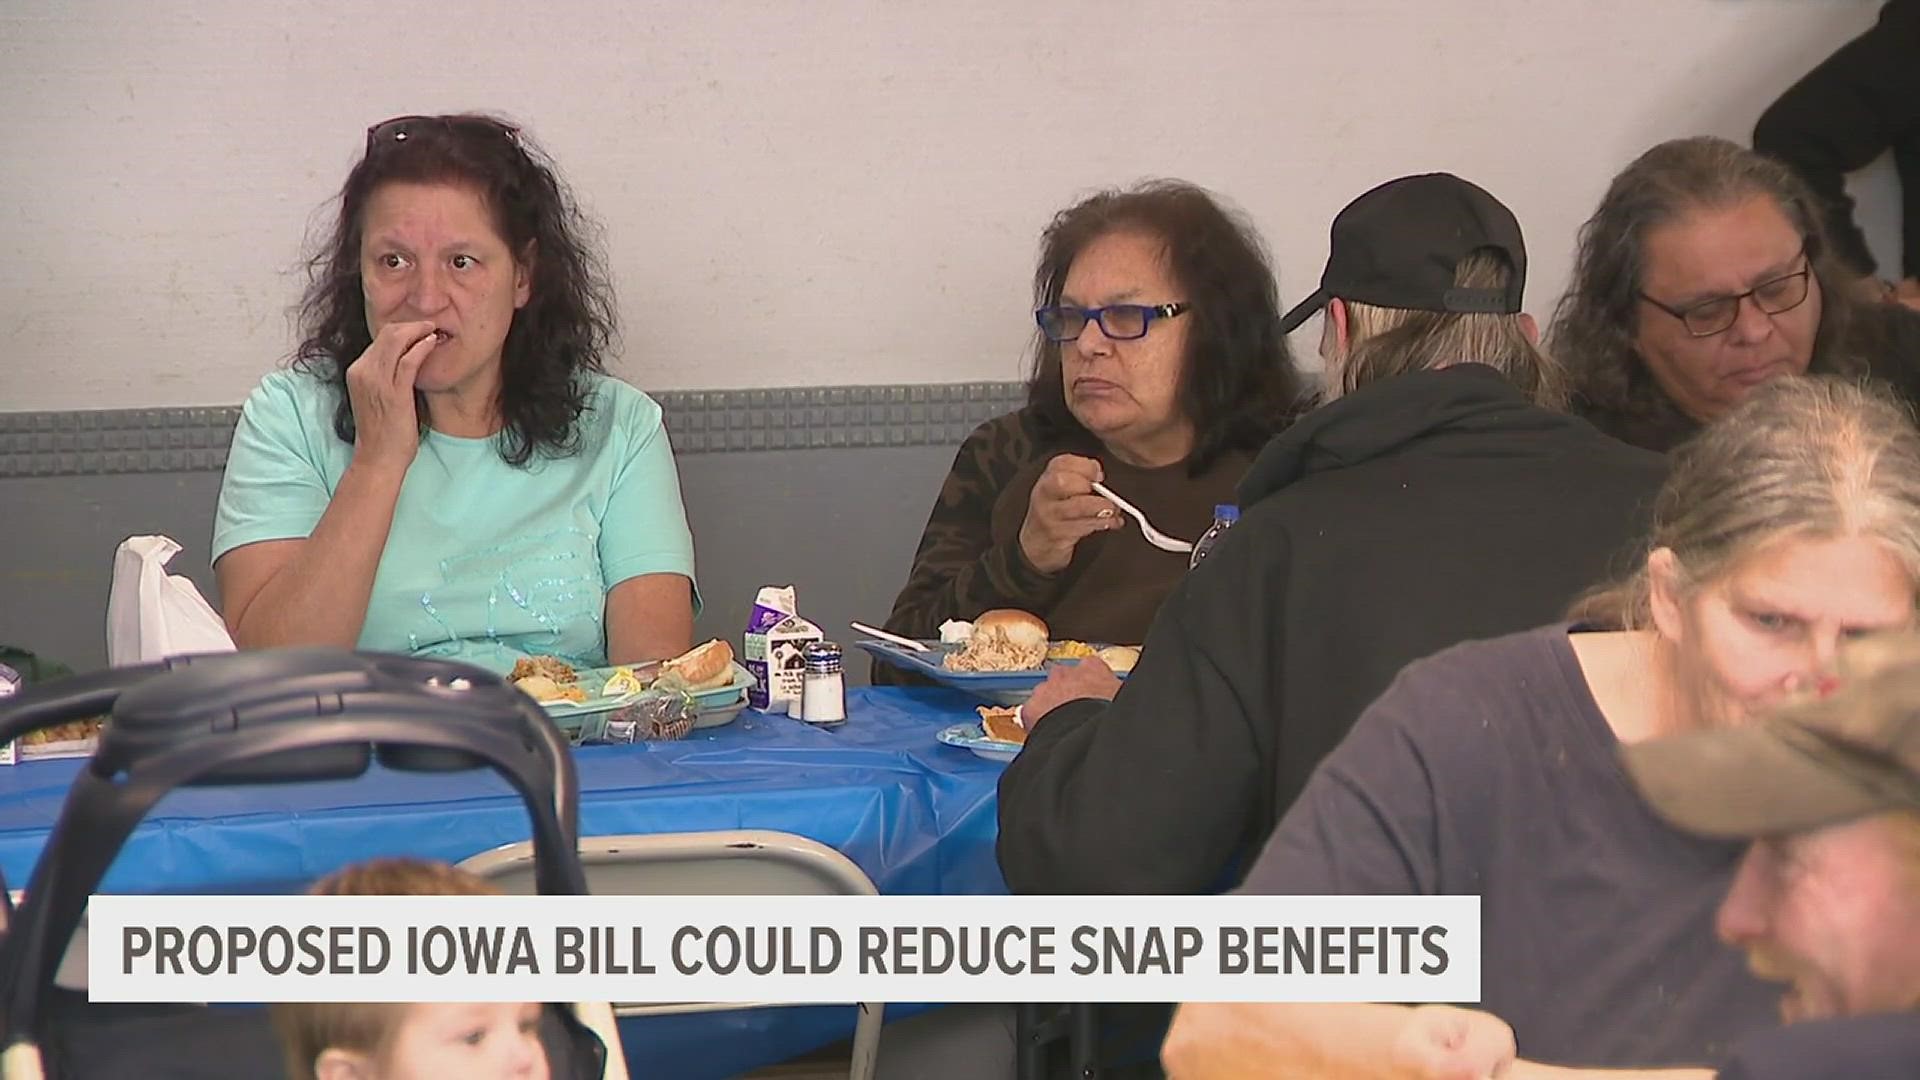 Senate Study Bill 1105 includes a controversial 'asset test' that would restrict access to SNAP benefits based on a household's value of certain assets.